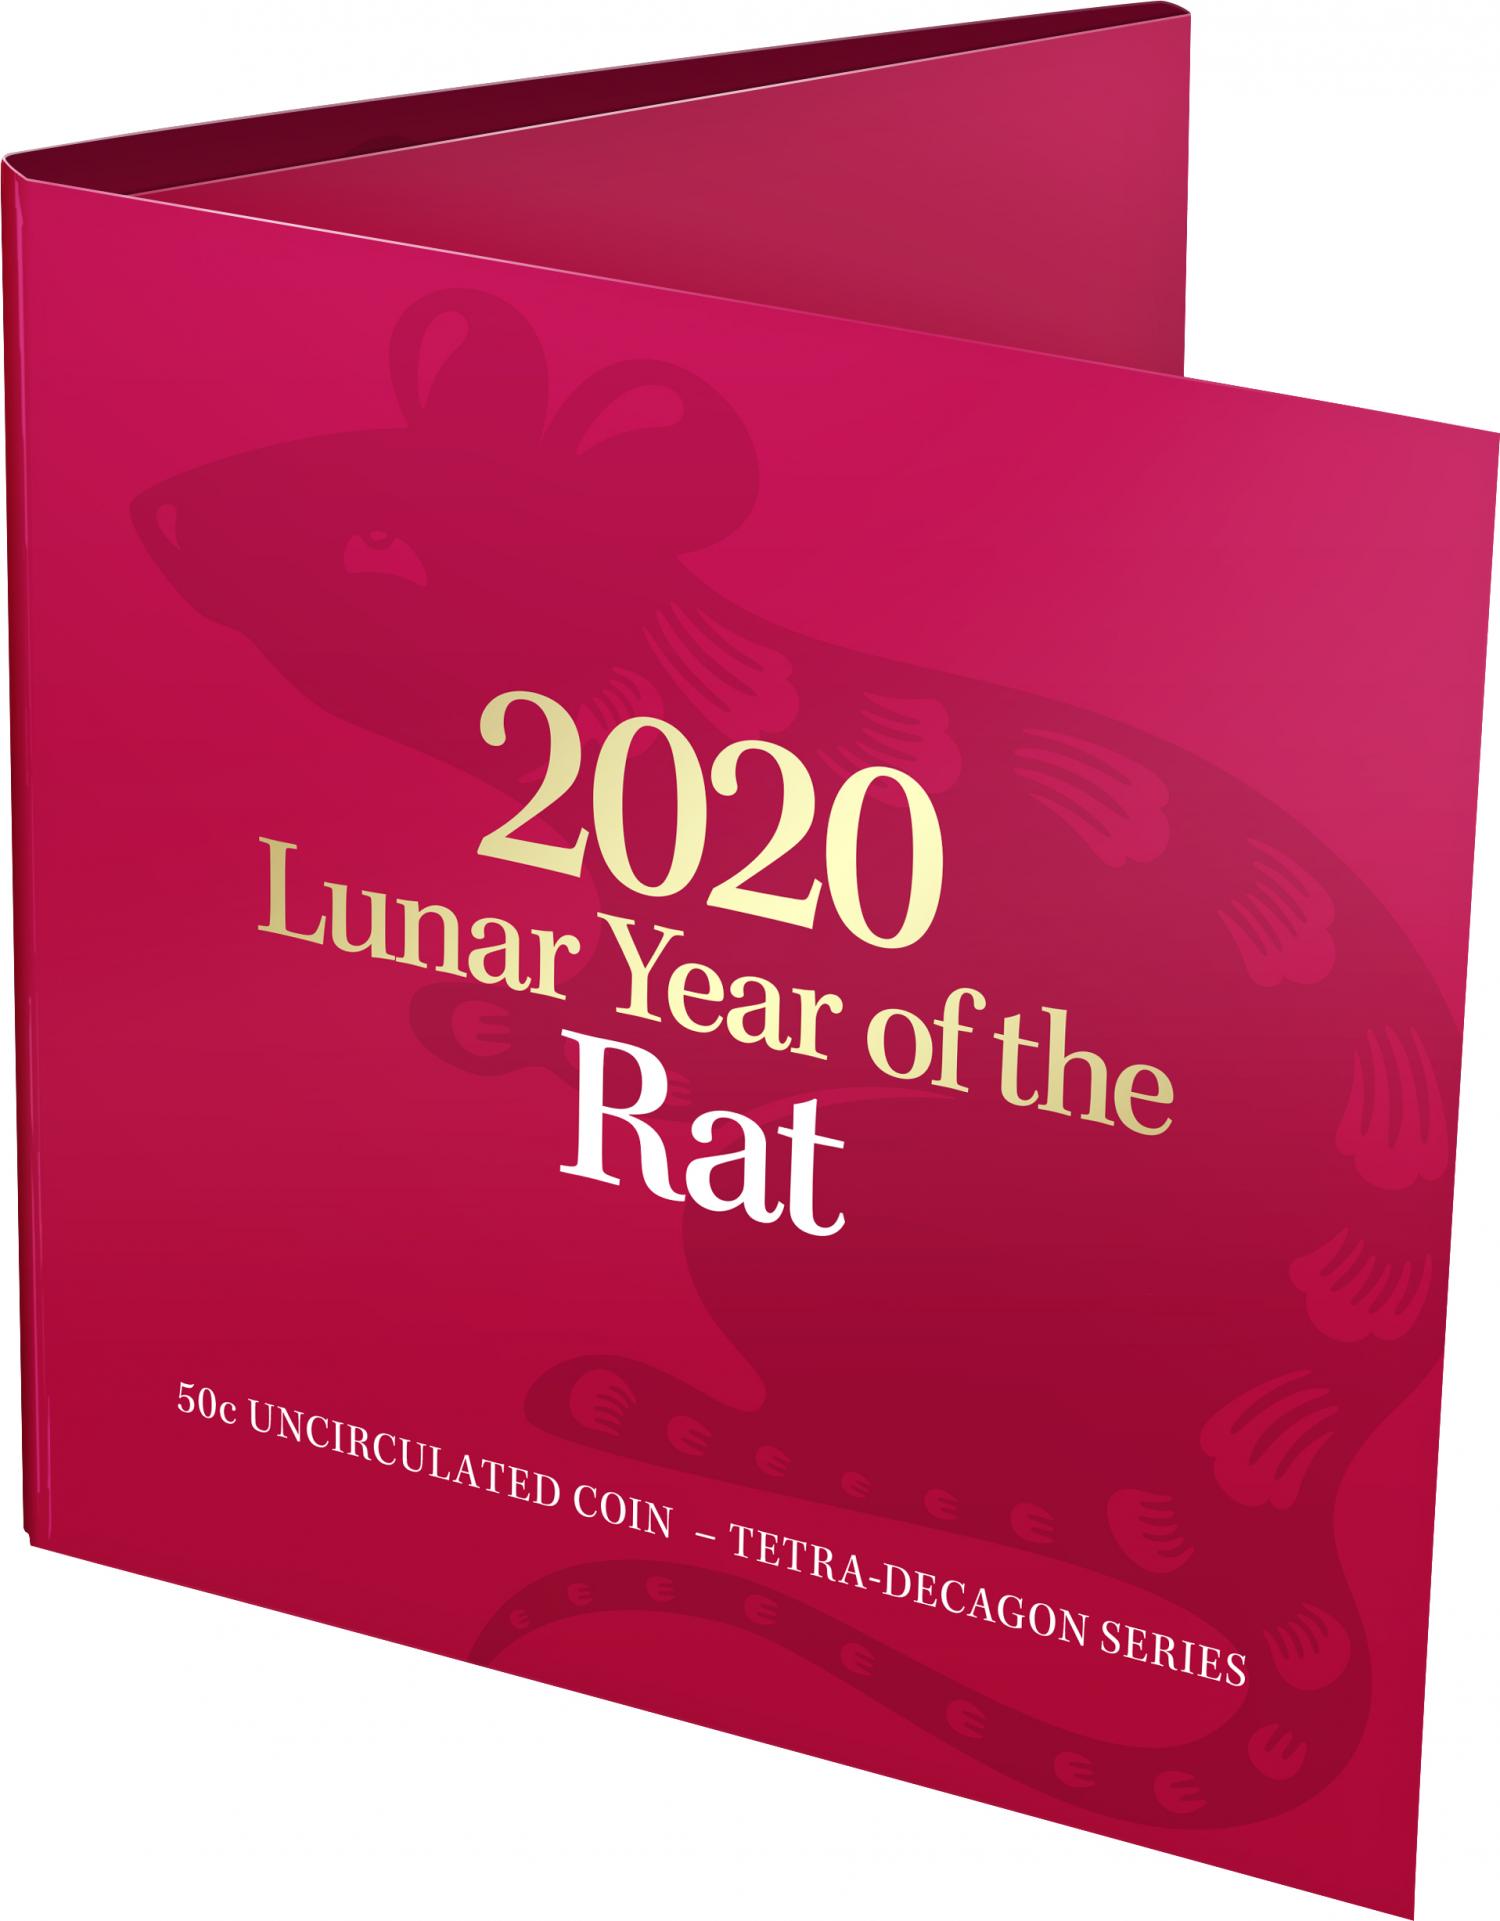 Thumbnail for 2020 Lunar Year of the Rat Uncirculated Fifty Cent Tetra Decagon Series